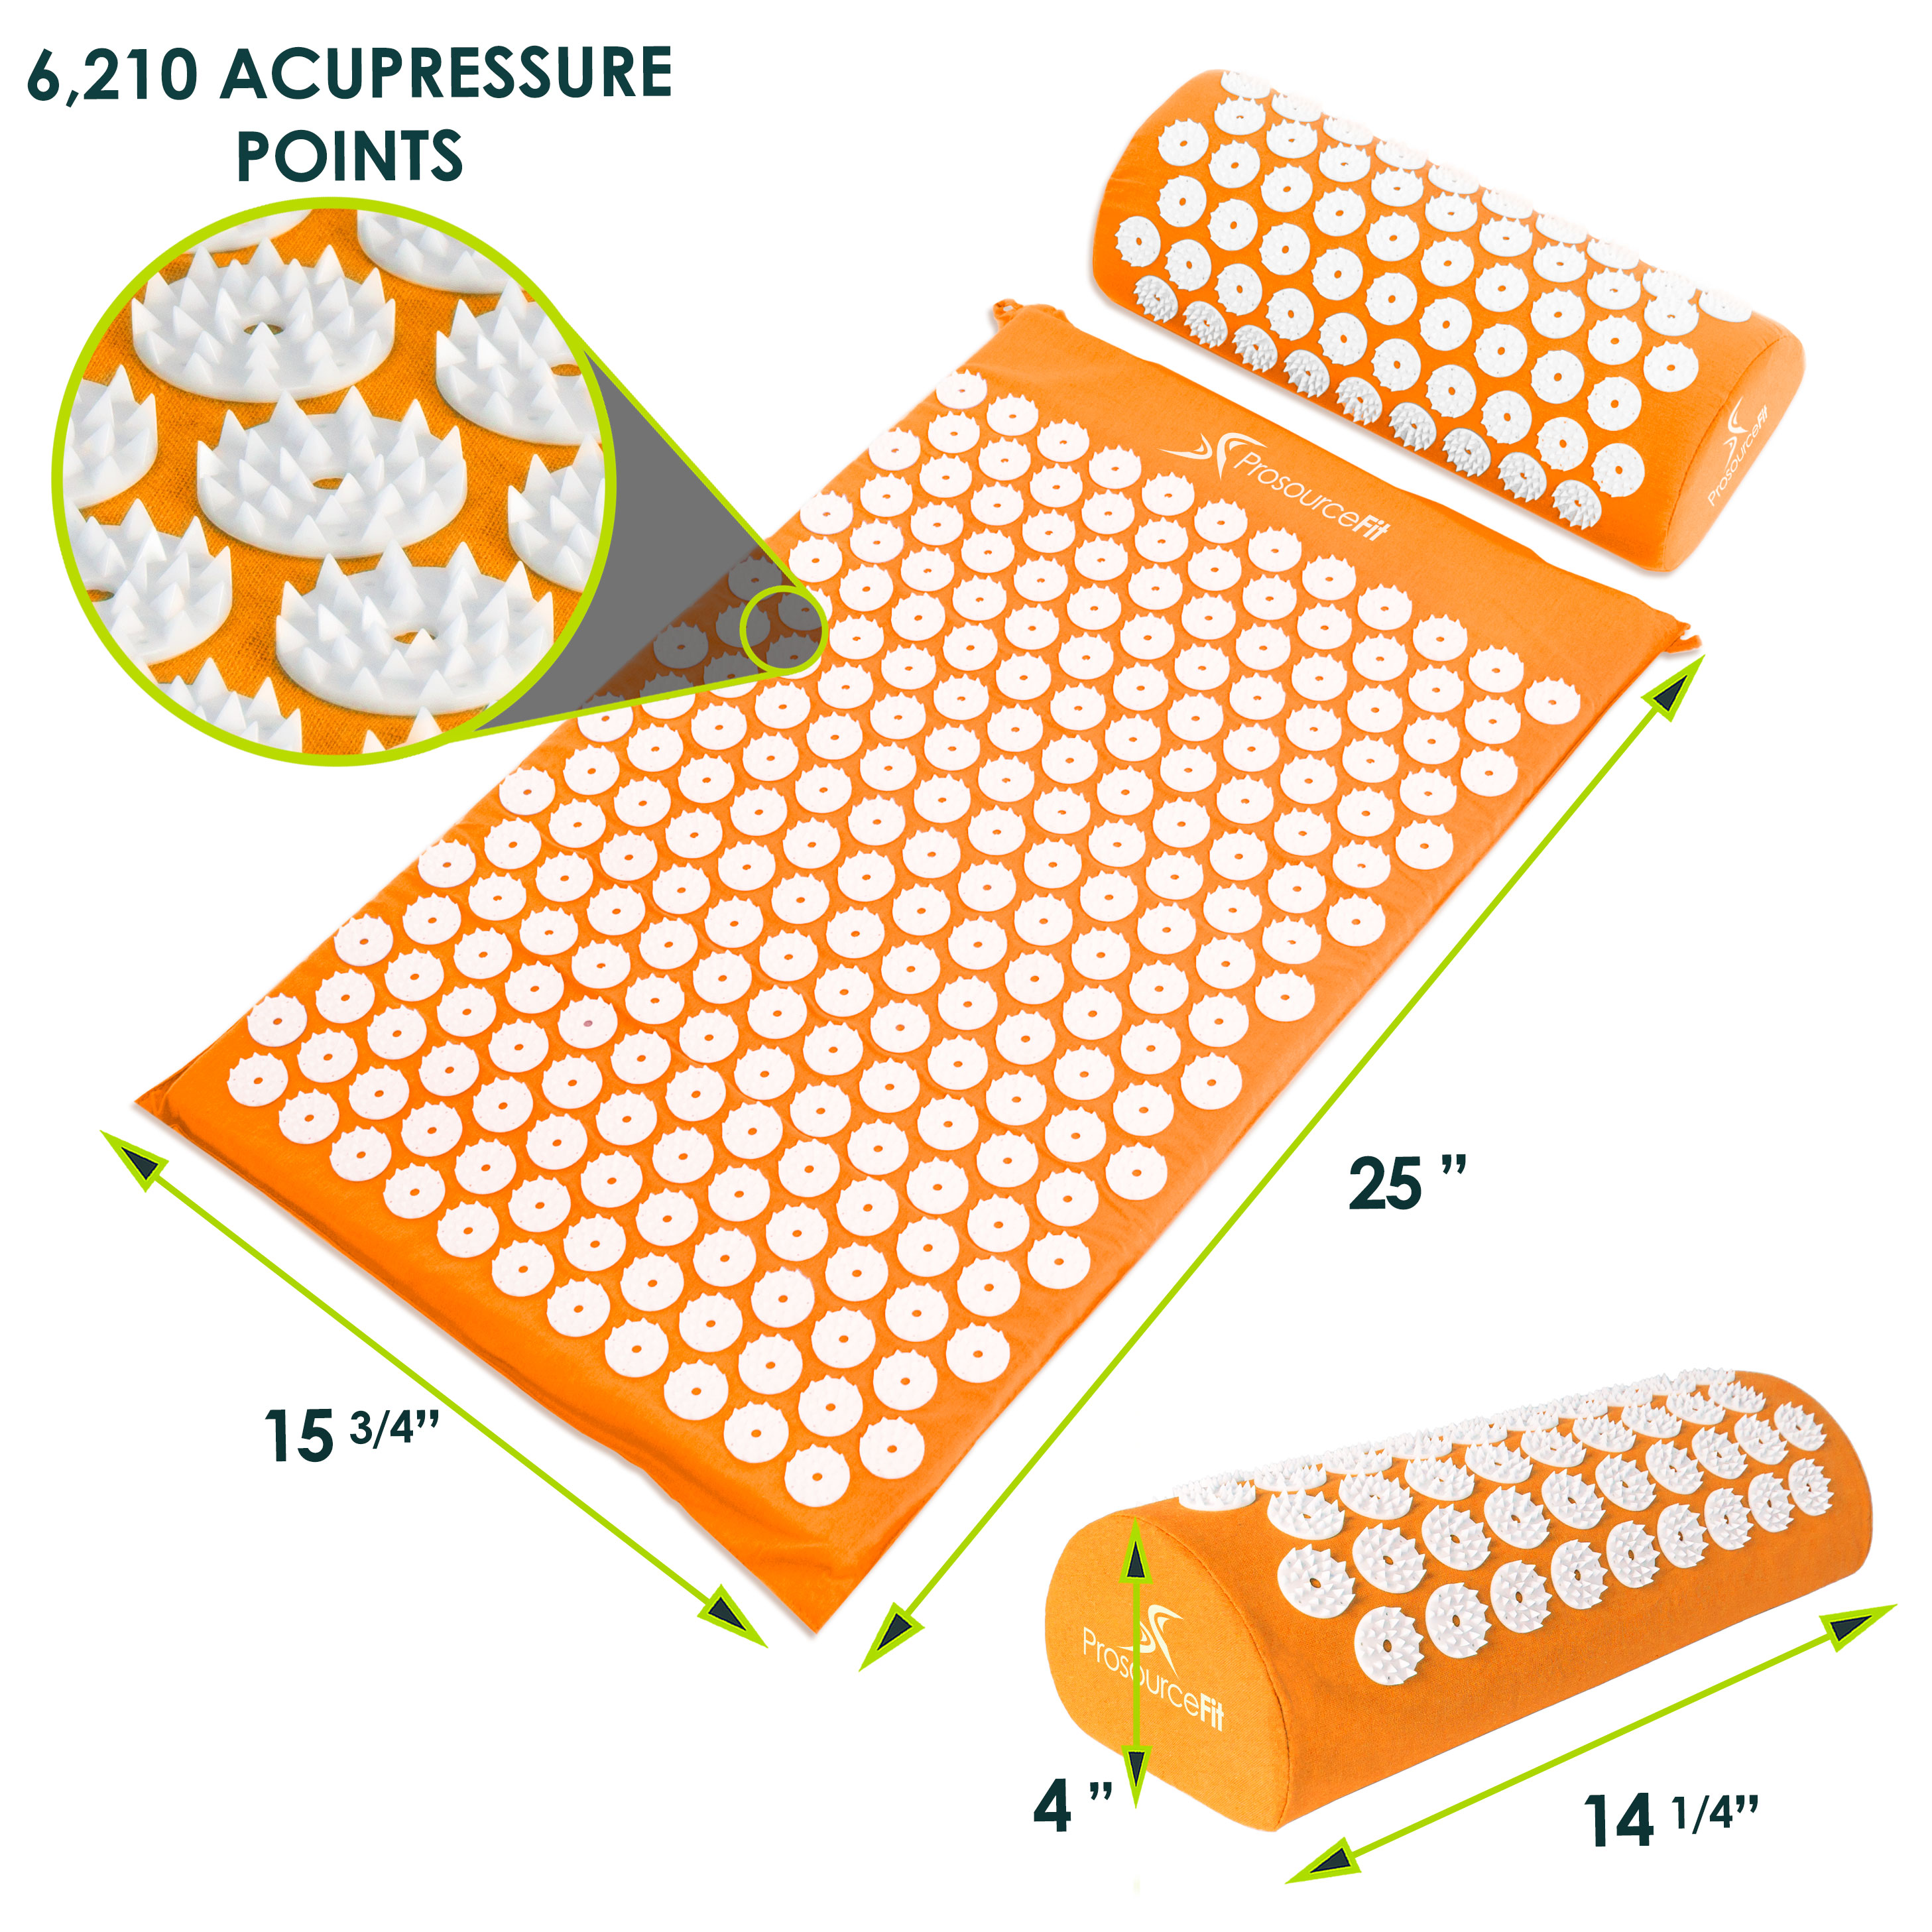  Relaxing Acupressure Mat, Acupressure Mat Set, Spiked Yoga Mat  for Body Health Care, Body Stretching for Home Use (Light Gray Pink Button)  : Health & Household